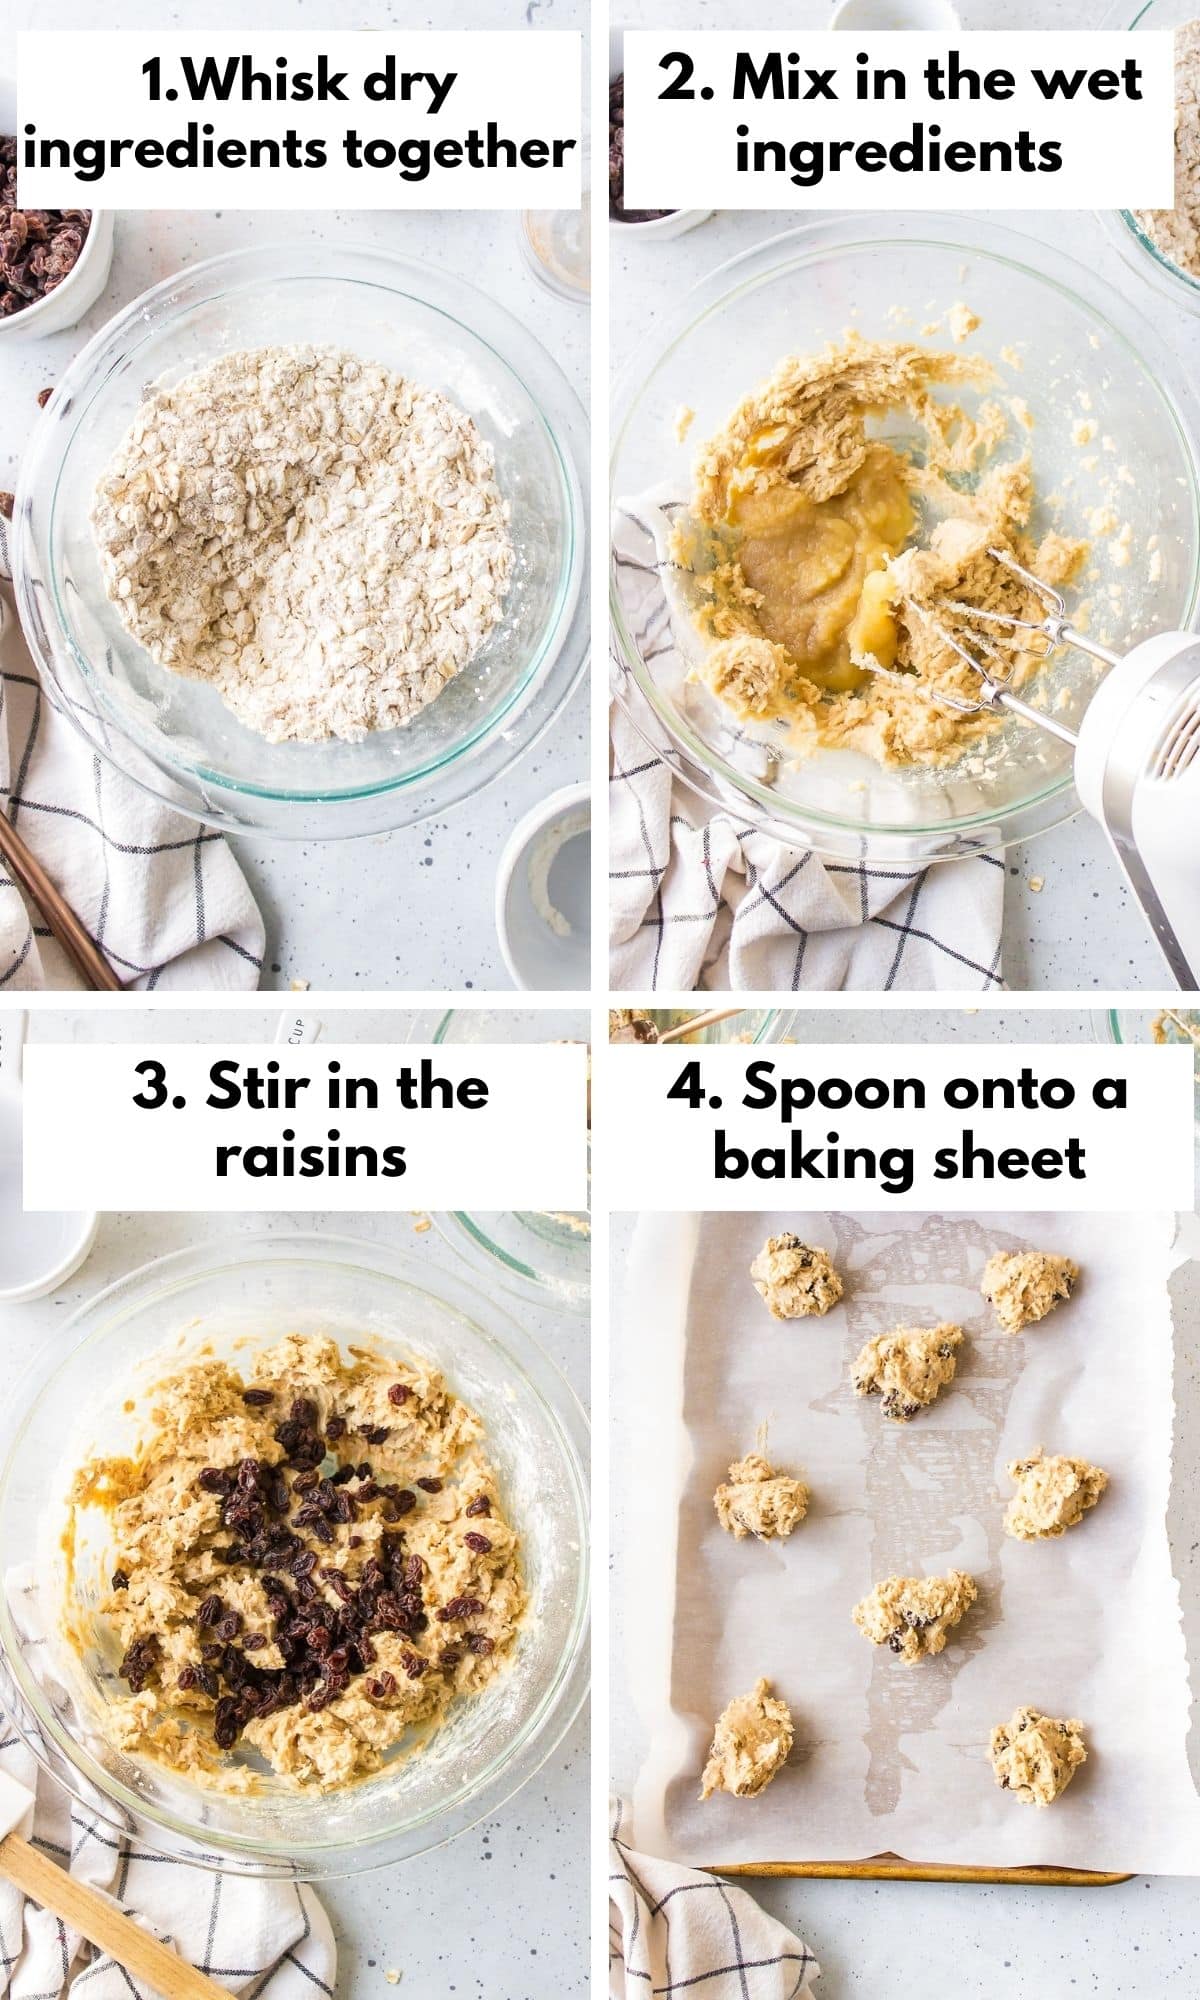 the process for making oatmeal cookies without eggs.